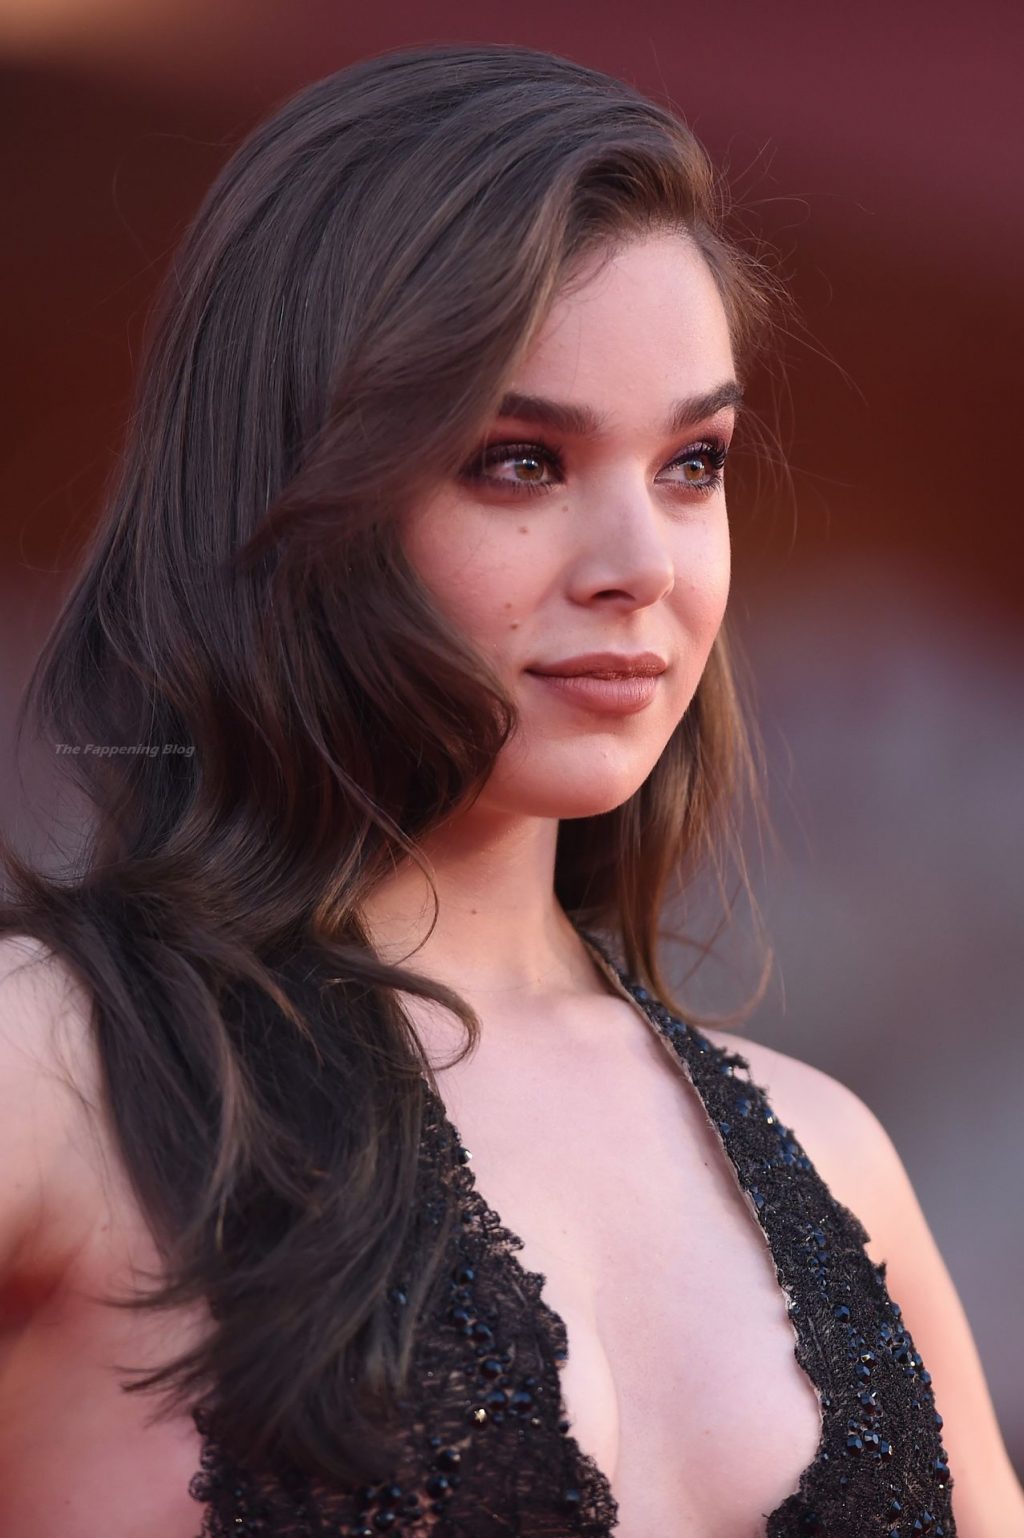 Hailee Steinfeld Flashes Her Toned Pins in a Black Dress at the Official Competition Premiere in Venice (117 Photos) [Updated]